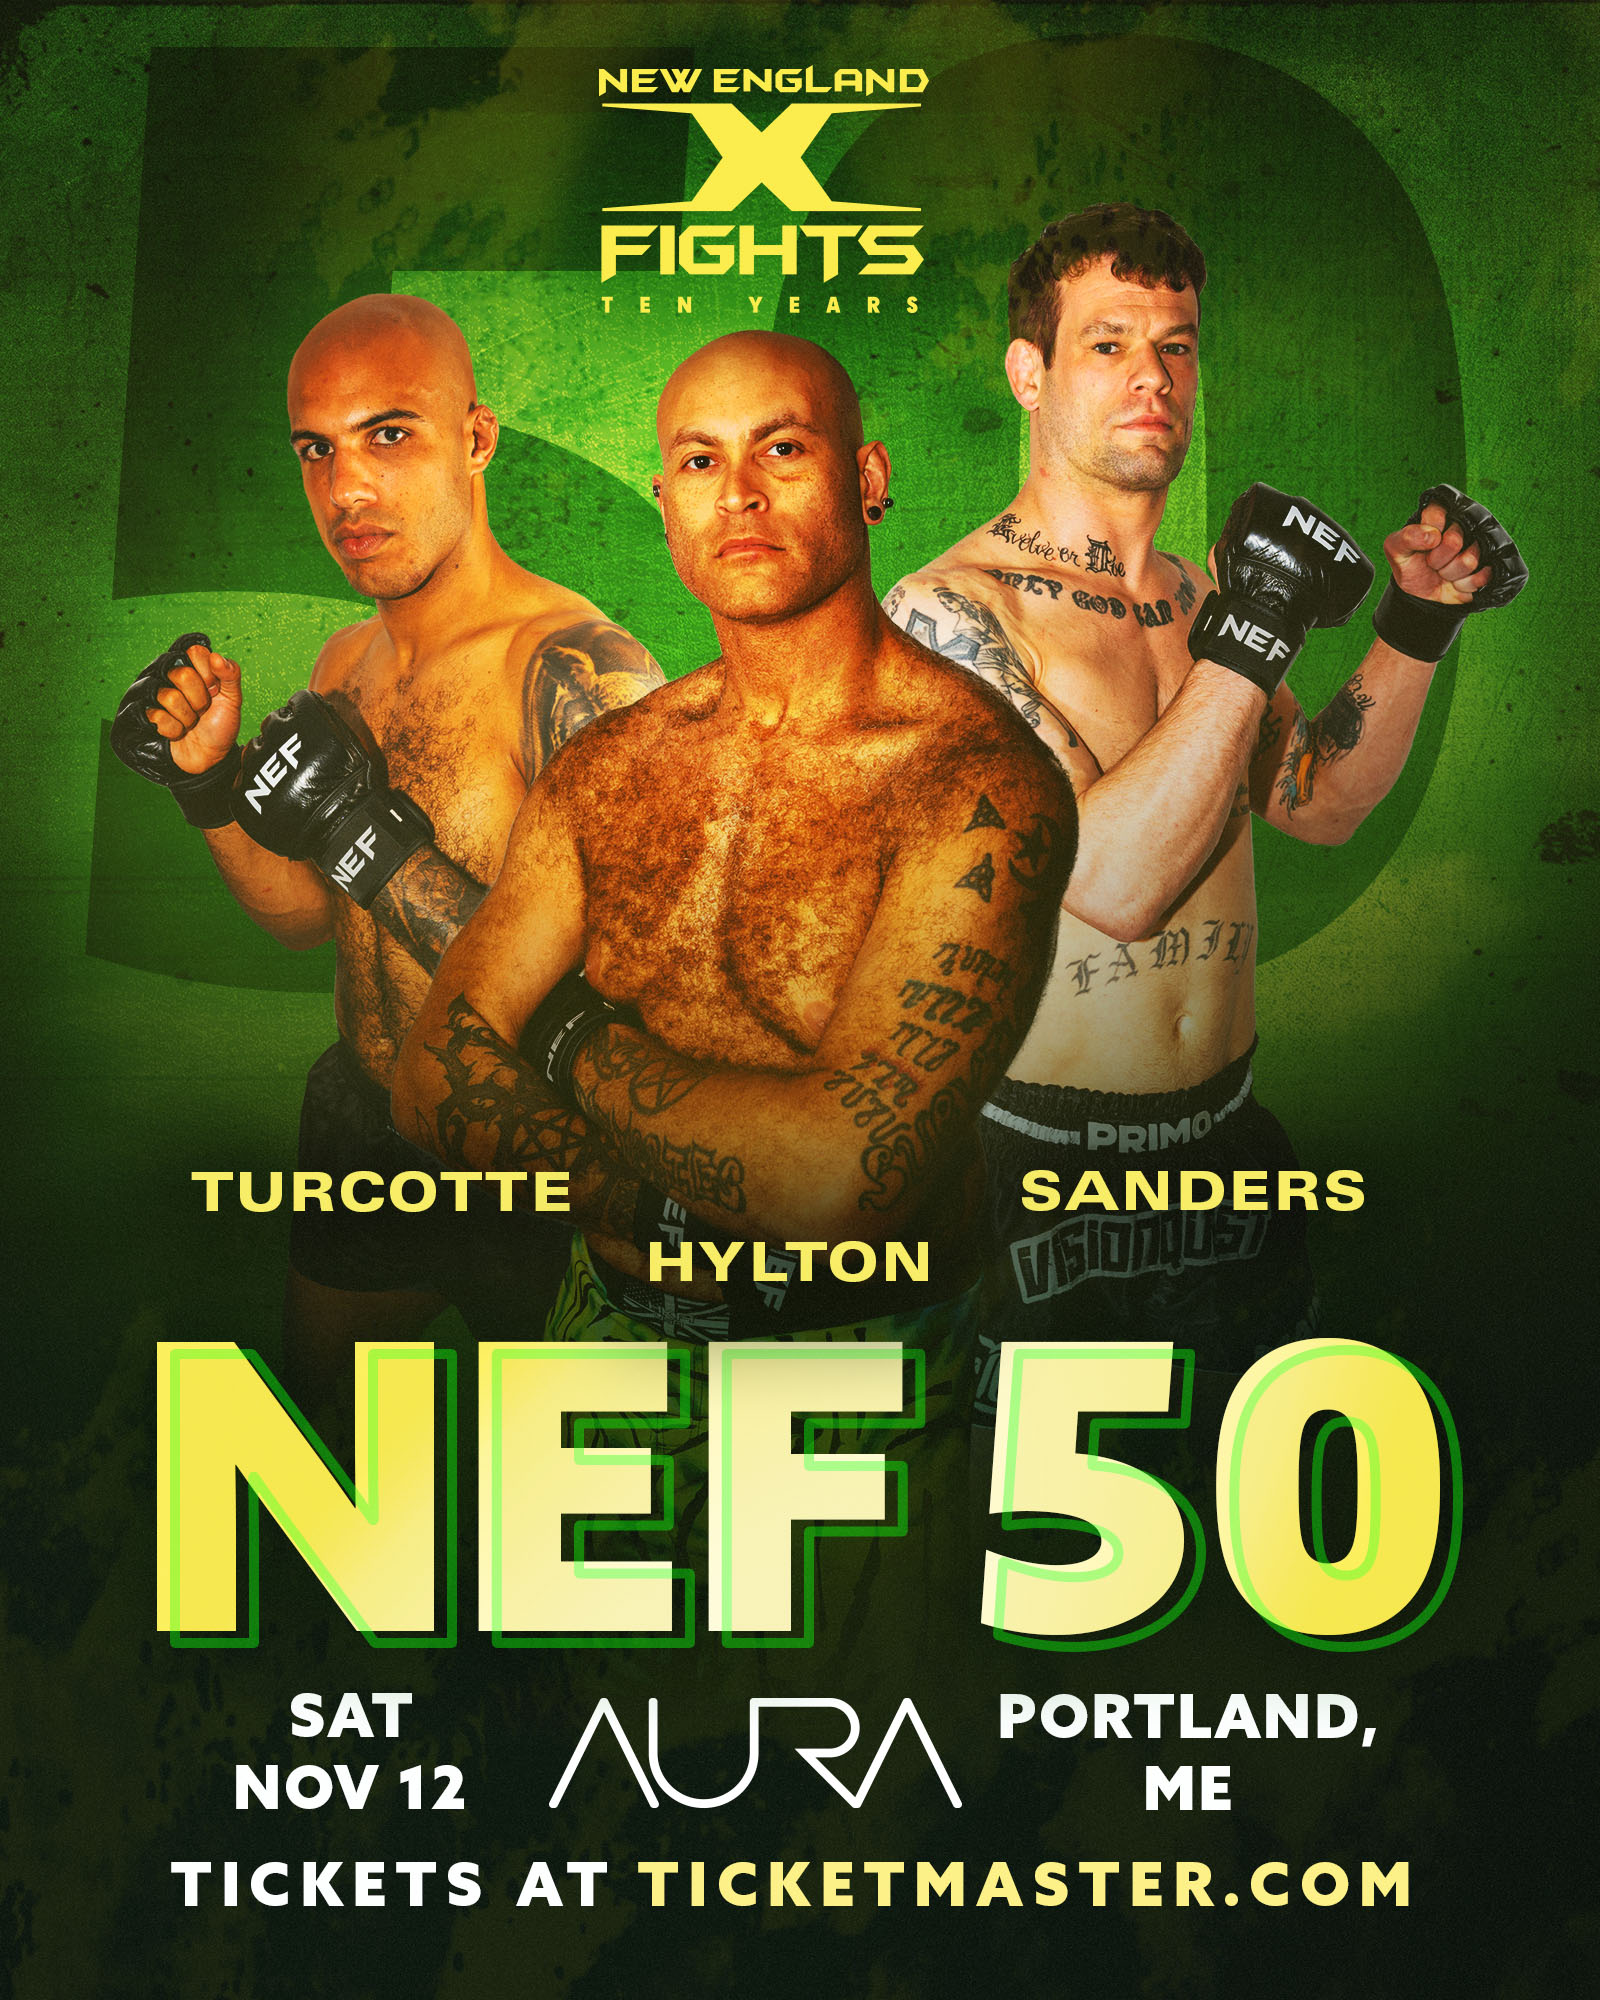 Watch New England Fights 50 on Combat Sports Now